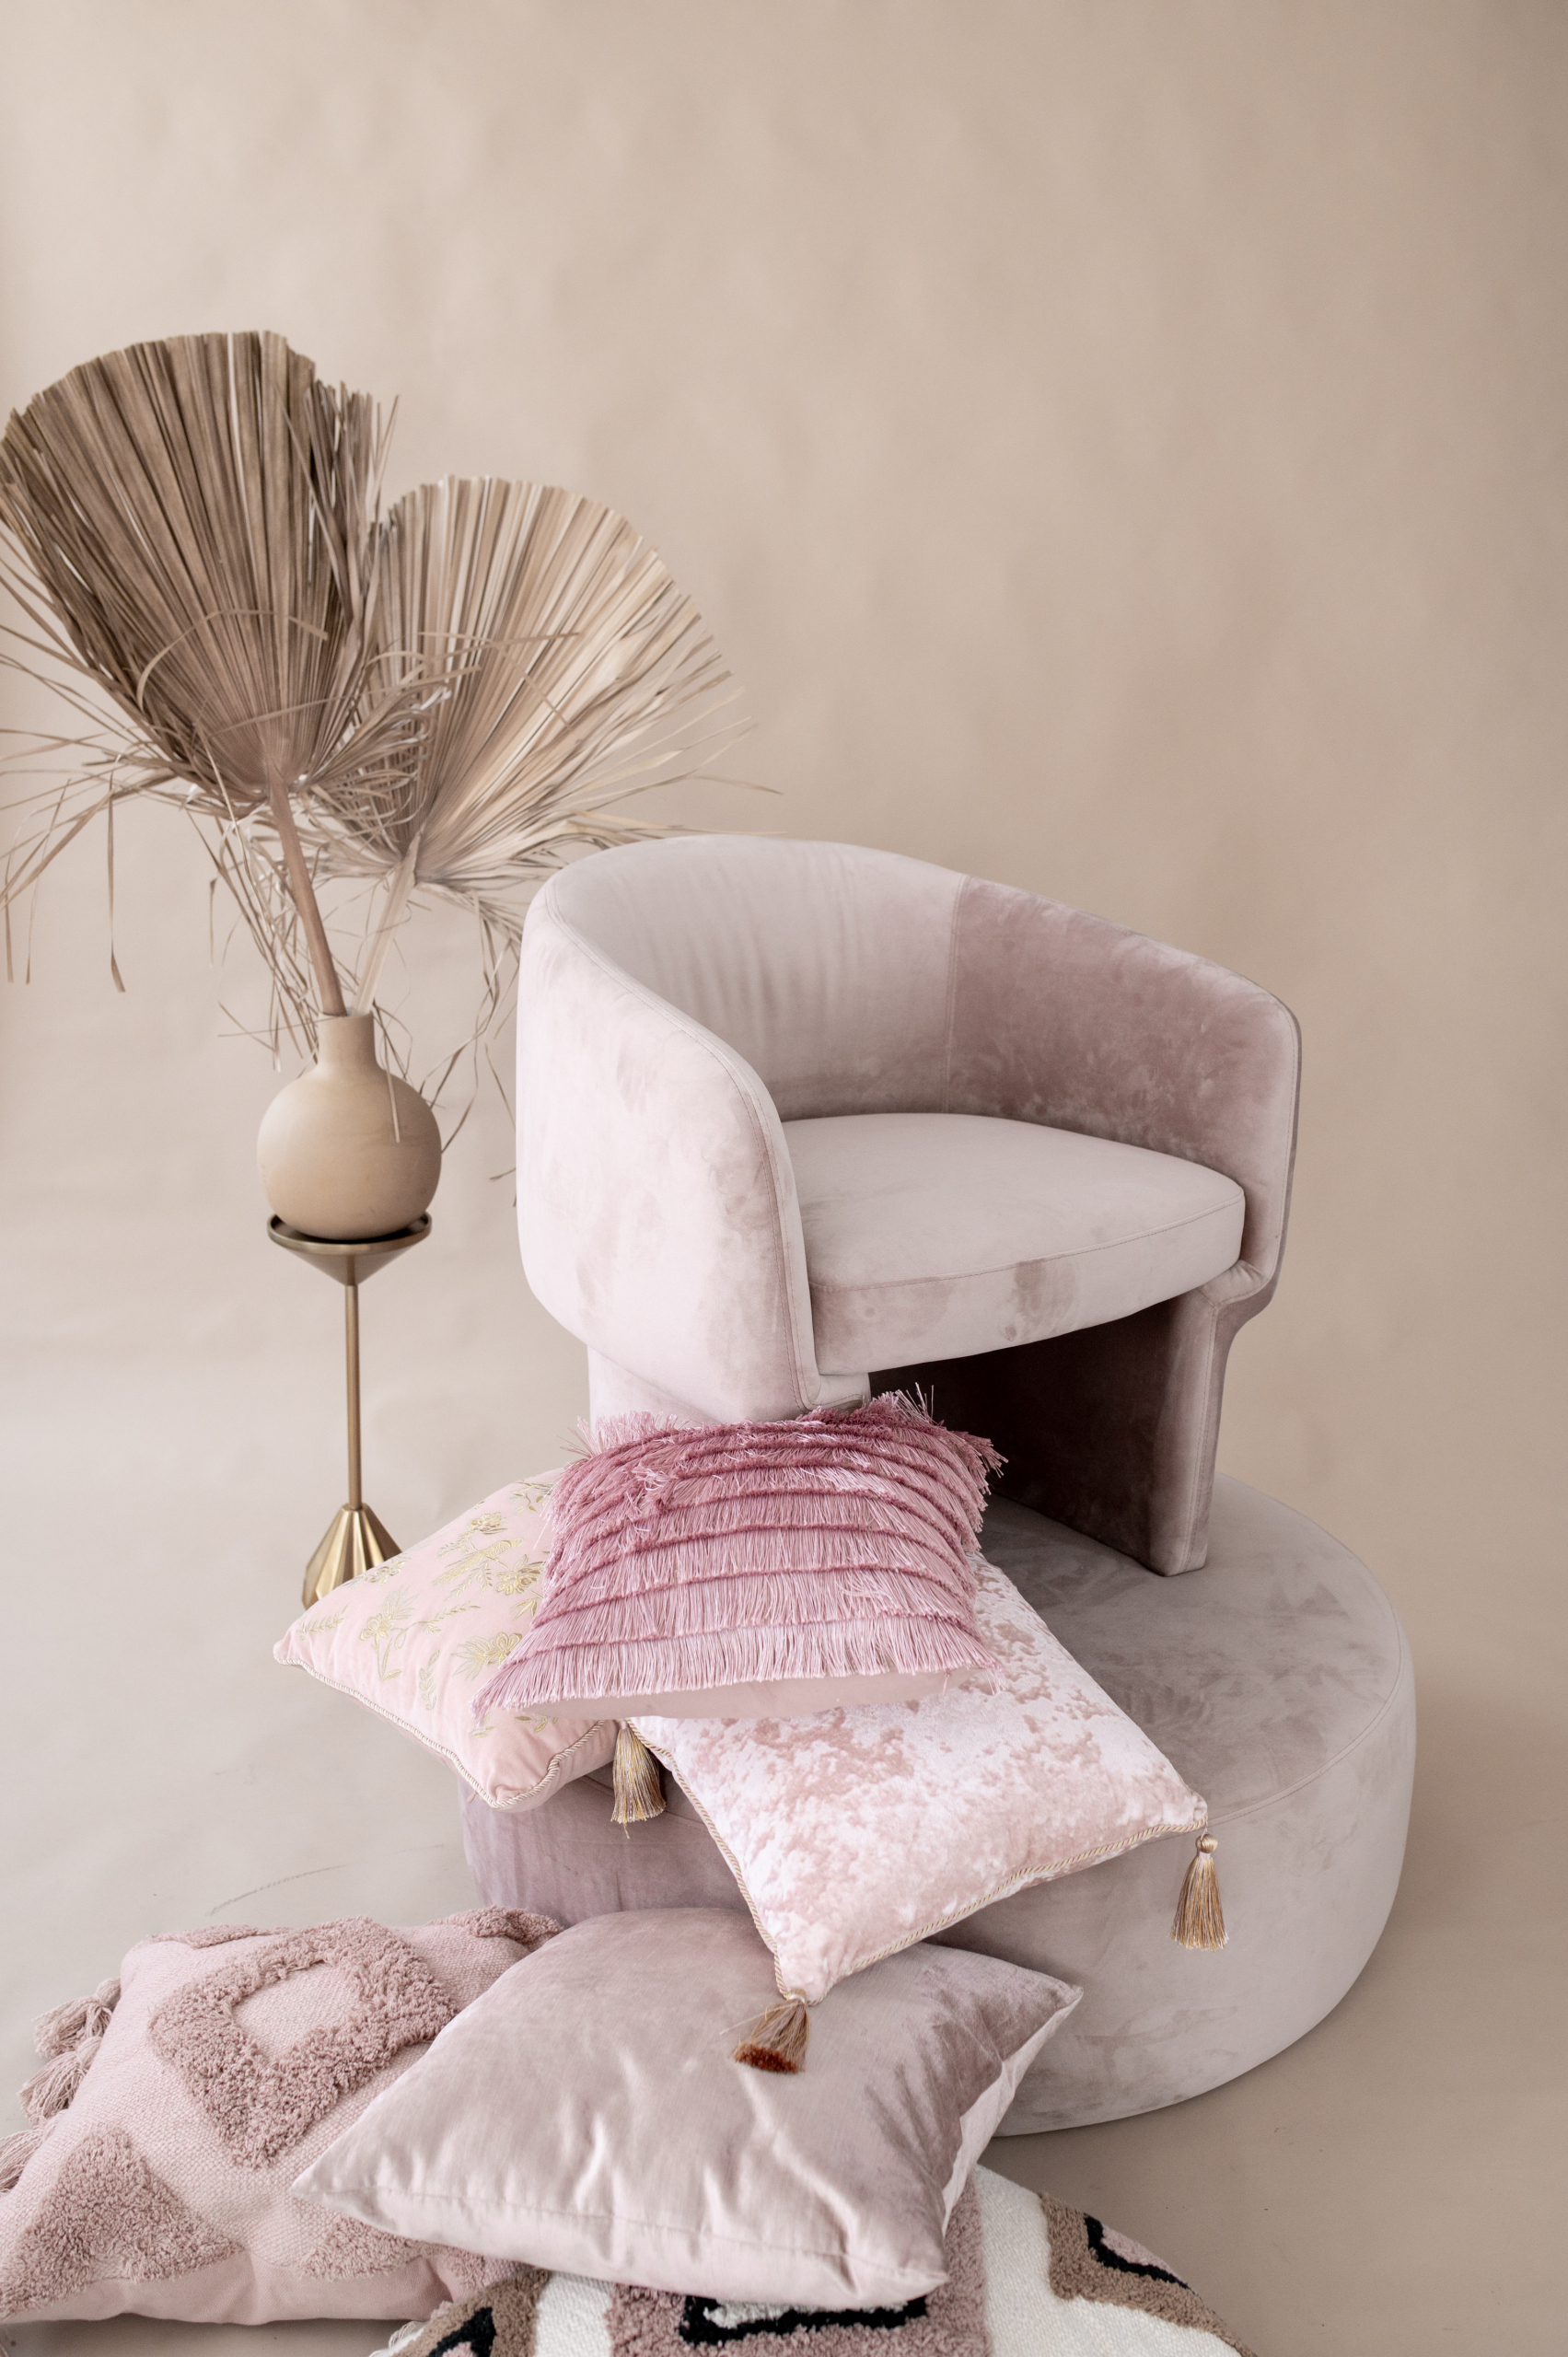 Kadeema Event furniture featuring pillow rentals in Blush Pink with Chair and ottoman